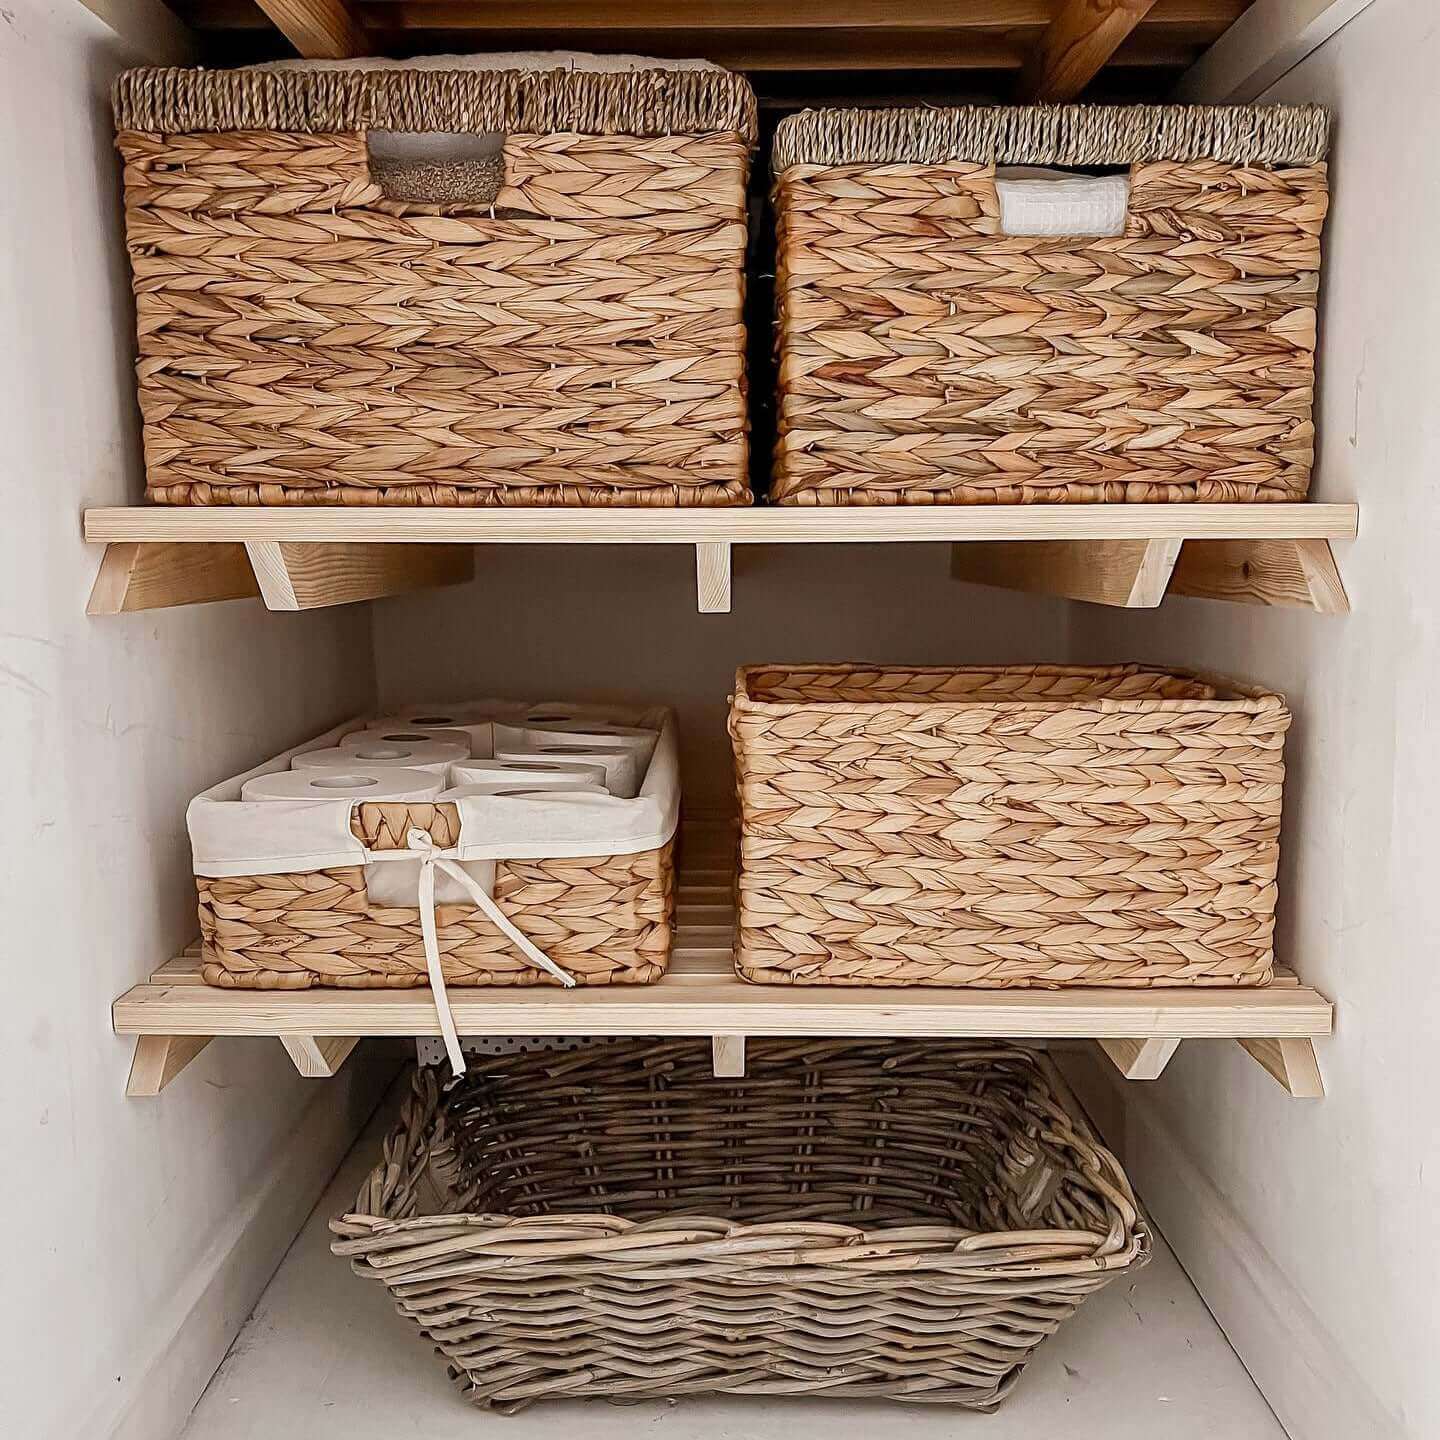 Airing Cupboard Wooden Slatted Shelves - 119 cm by 60 cm